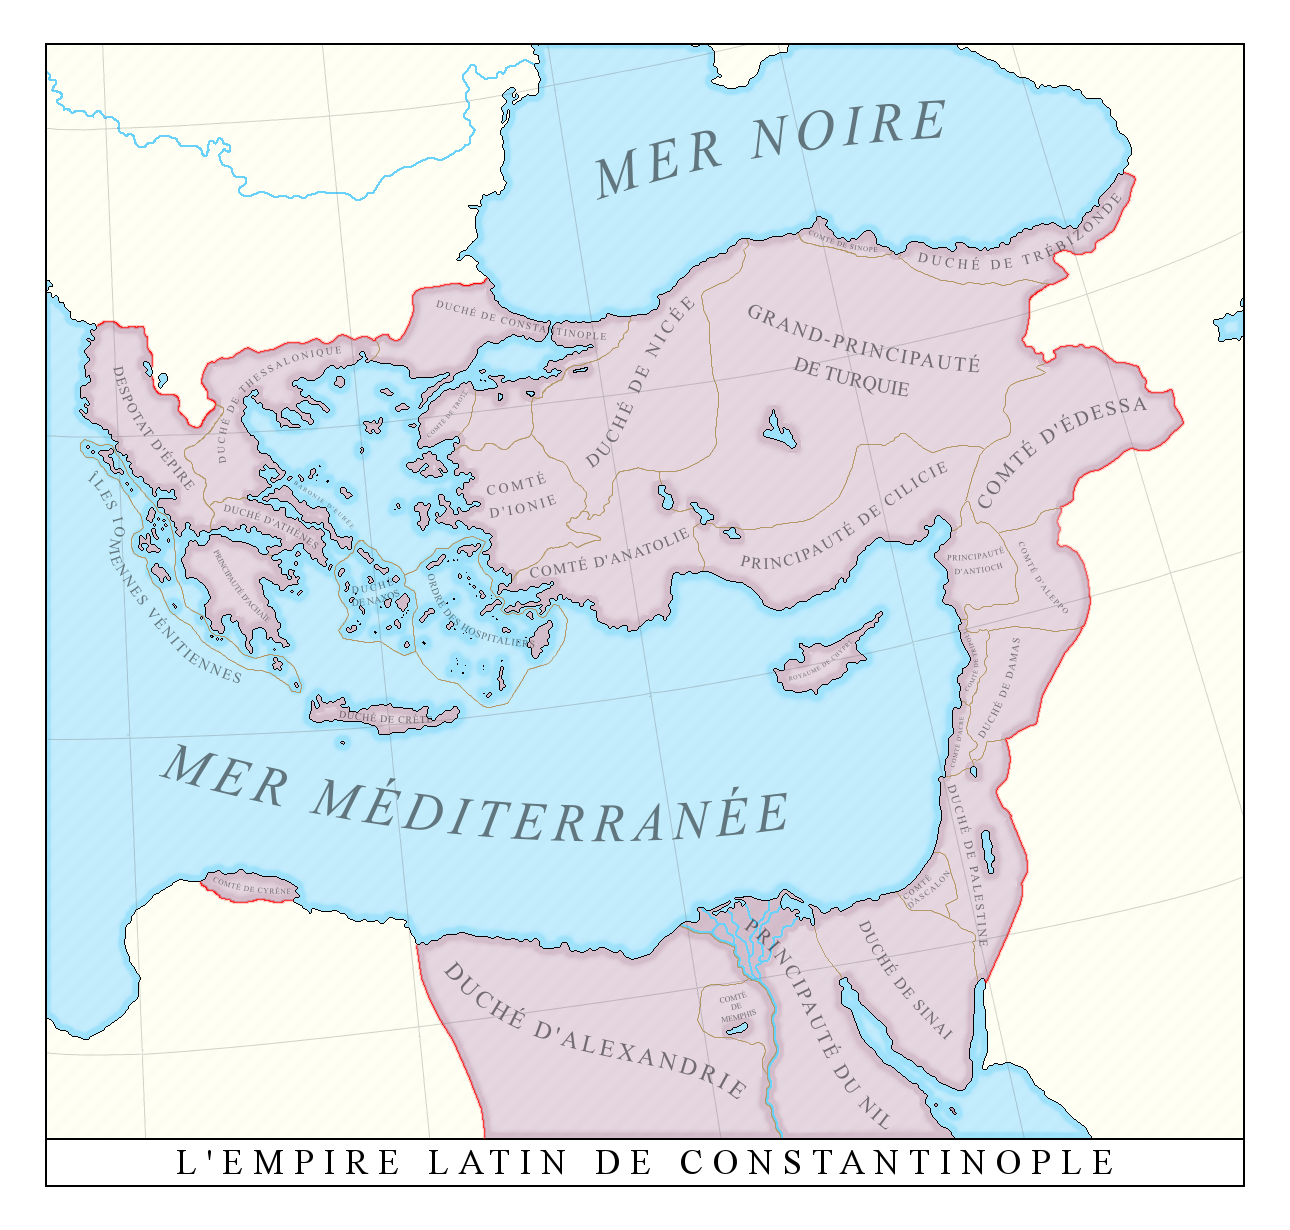 The Latin Empire of Constantinople by xpnck